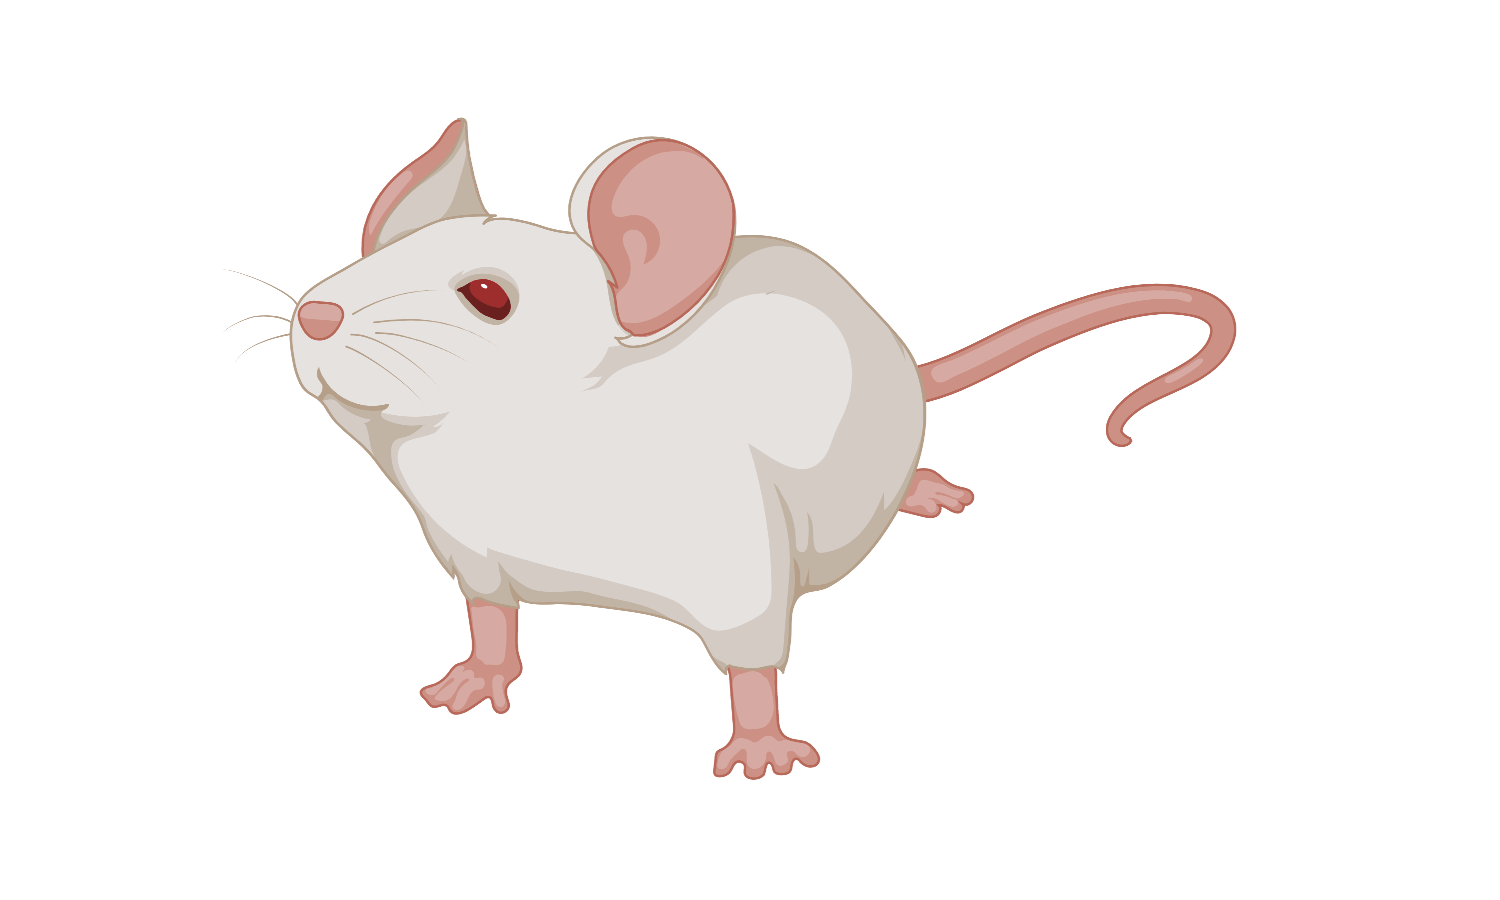 Image of a white mouse.